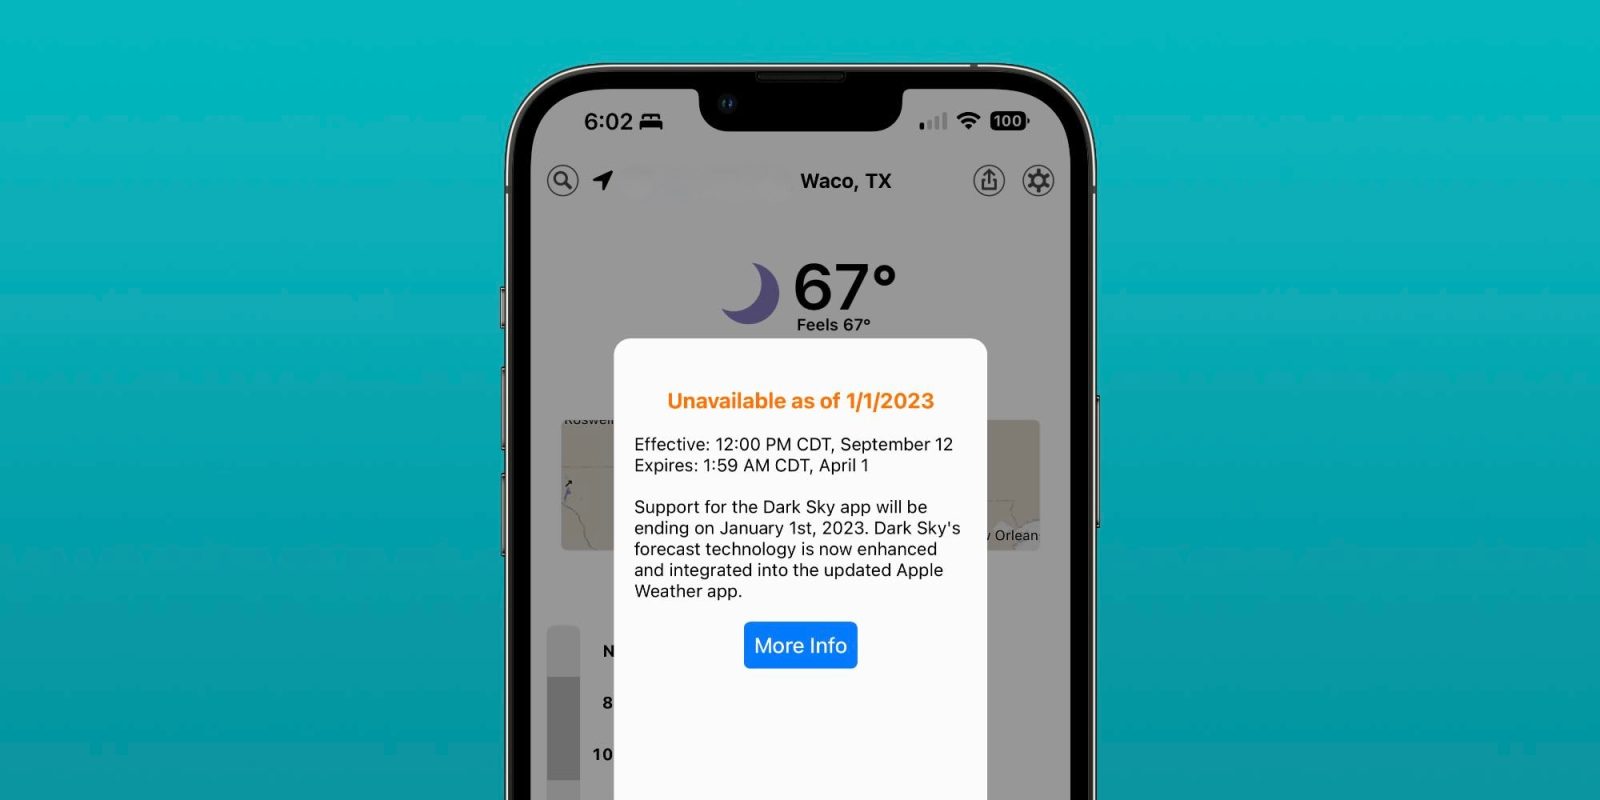 Apple warns Dark Sky for iOS users of 2023 shutdown [U: Removed from App Store]